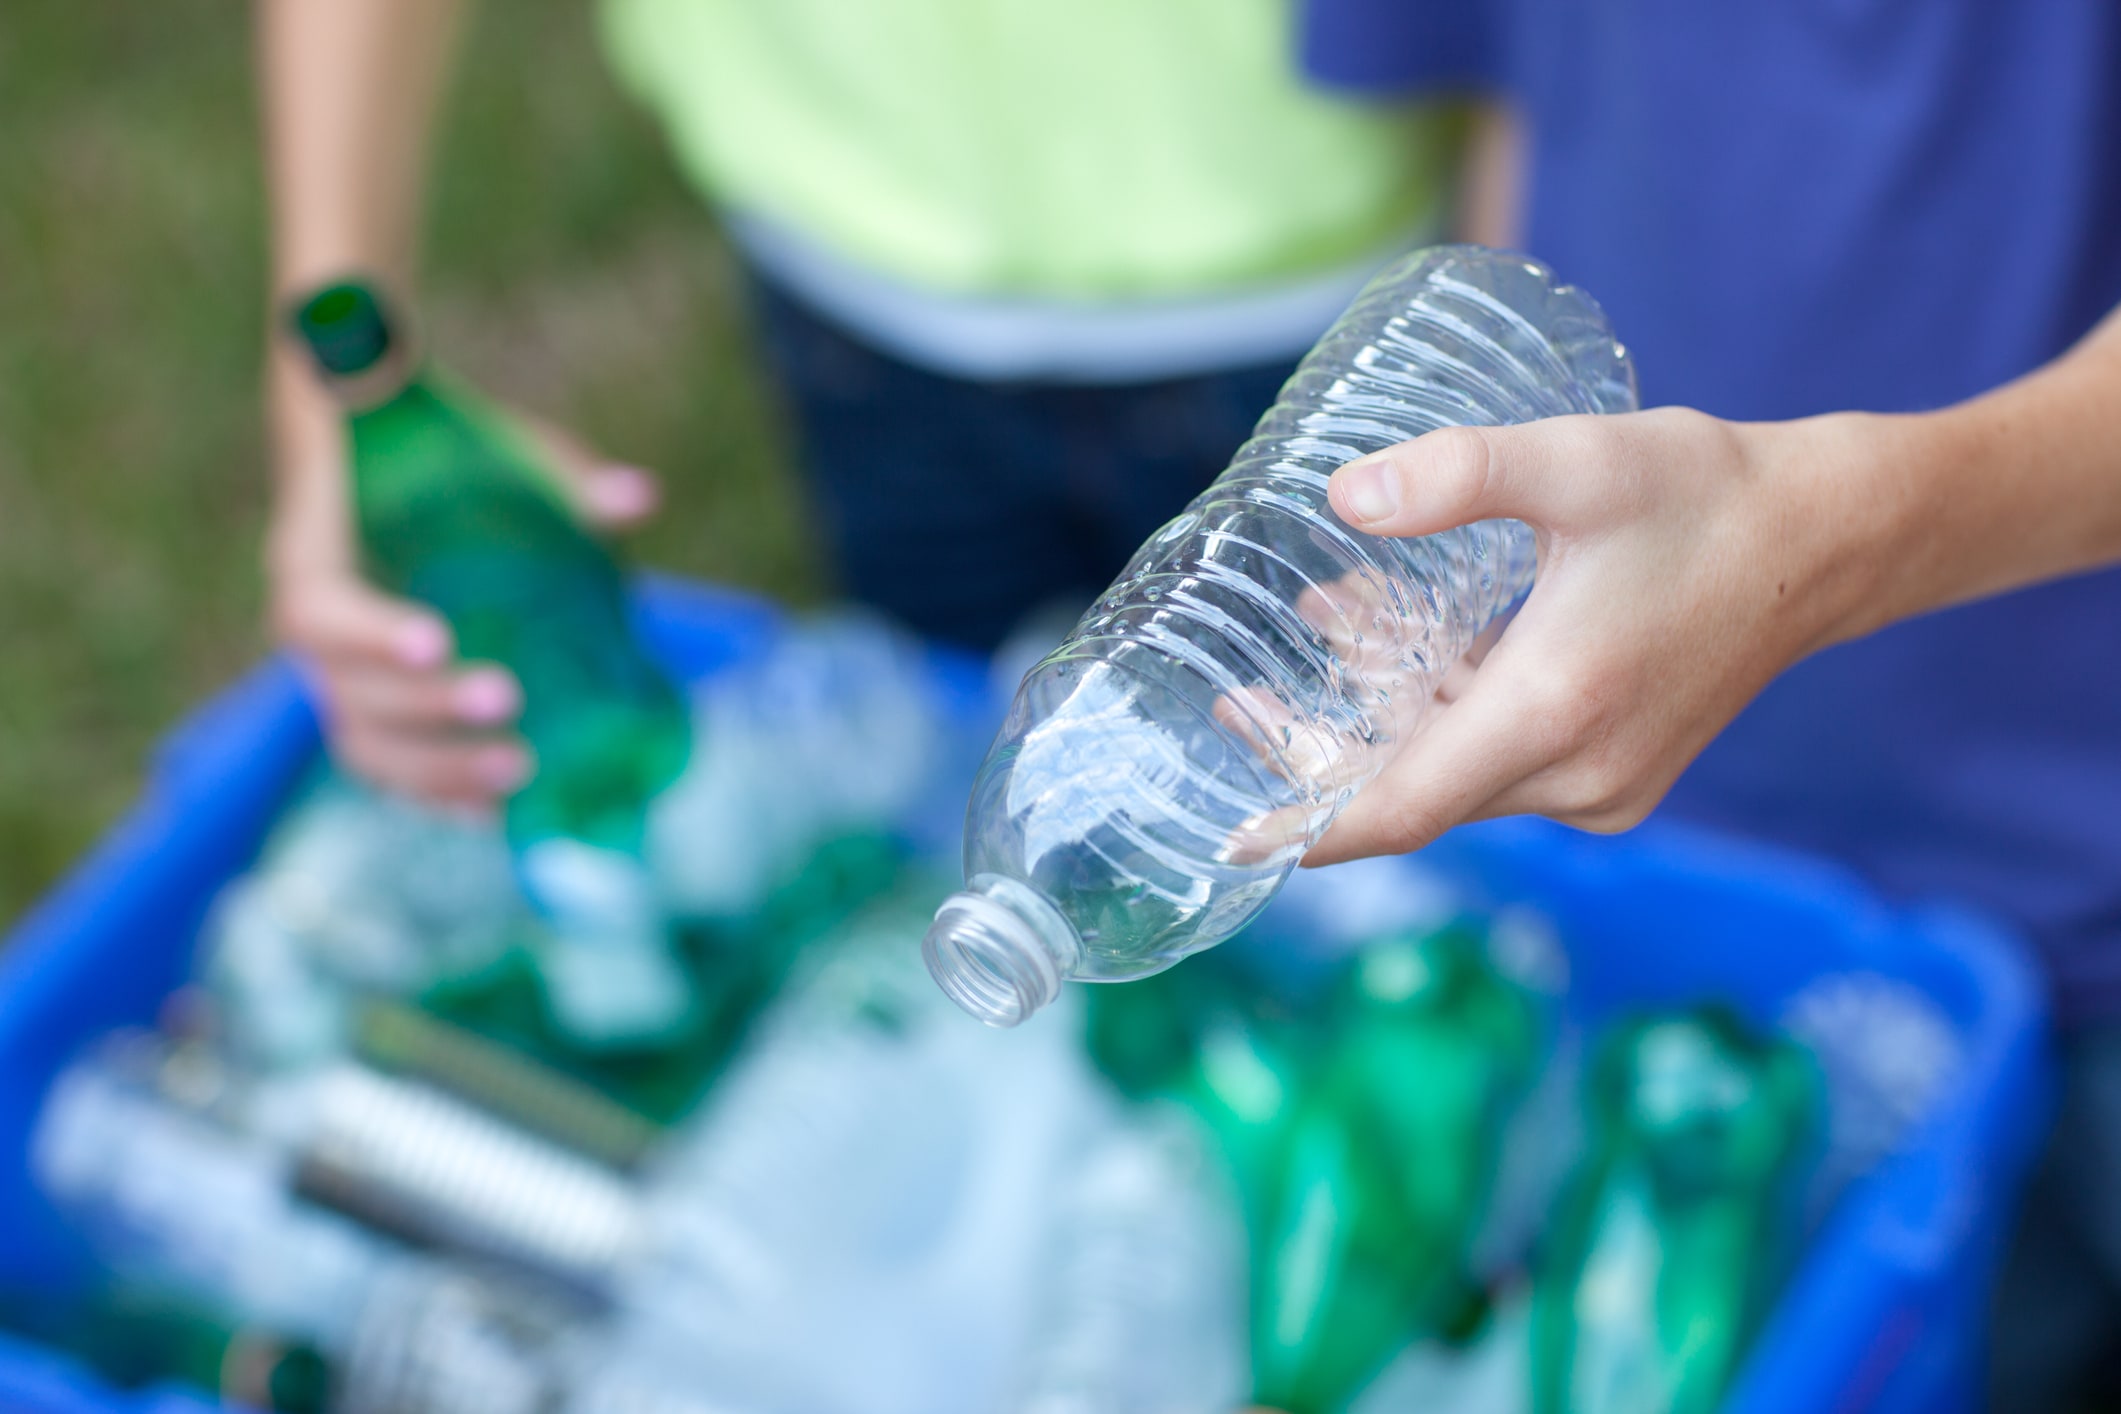 A person holds a green glass bottle while another person holds a clear plastic bottle. They are placing the bottles in a recycling bin.